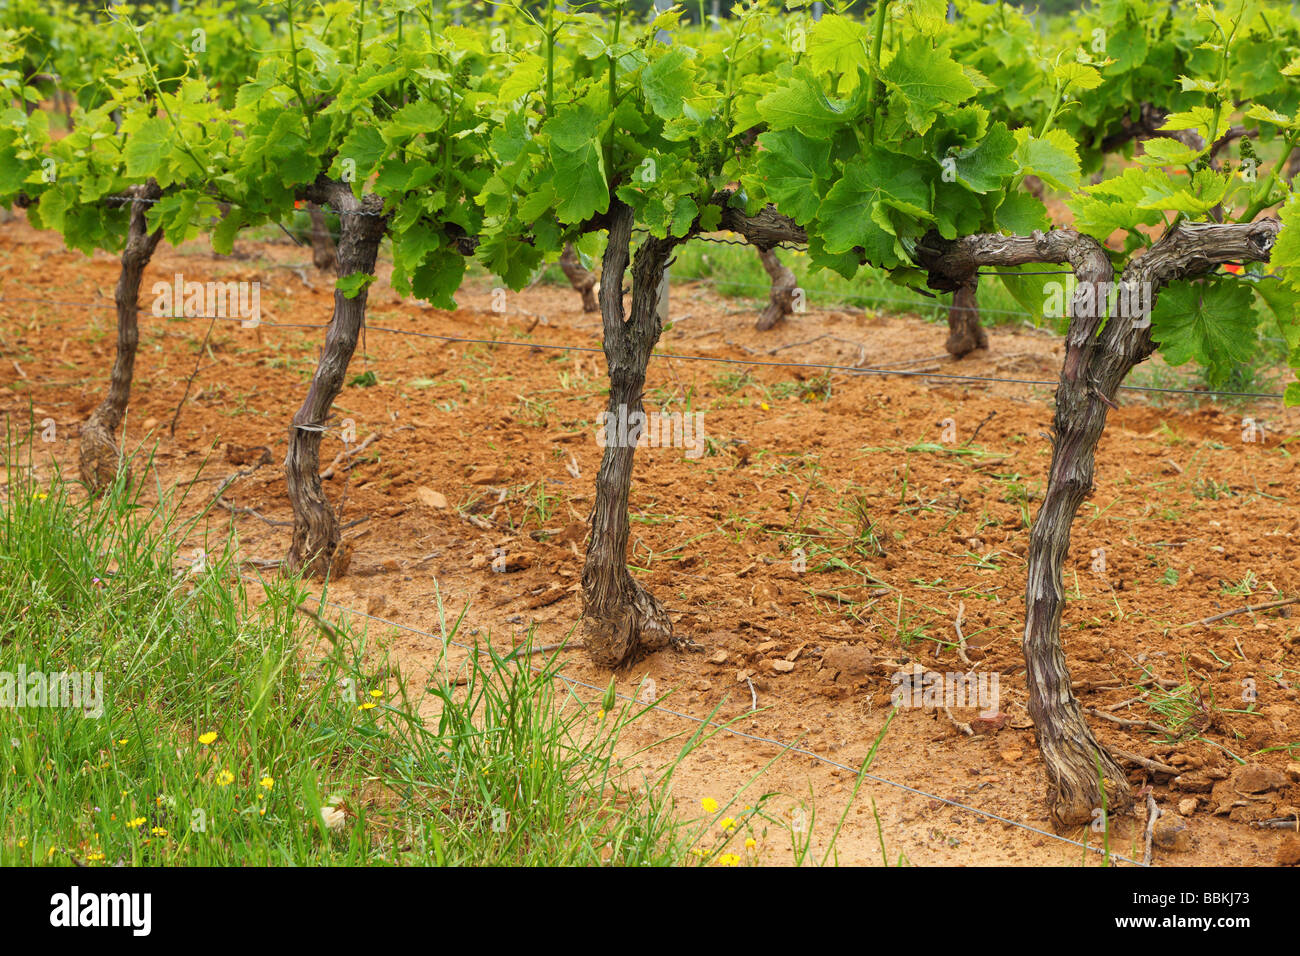 Vine grapes with young green spring leaves Minervois Languedoc-Rousillon France Vitis vinifera Stock Photo